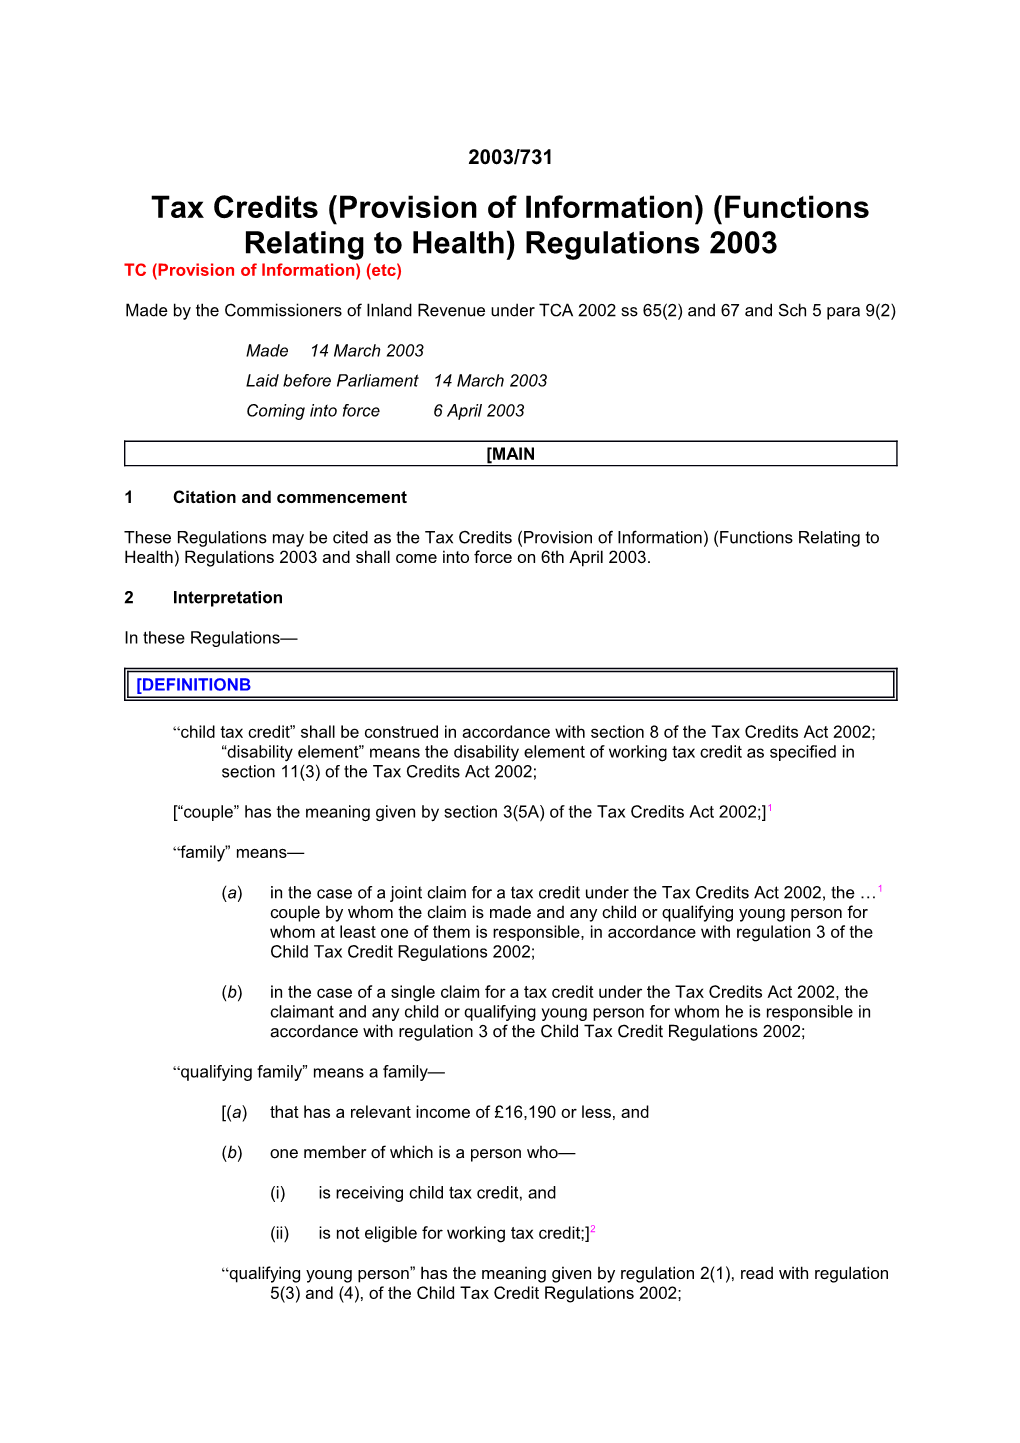 Tax Credits (Provision of Information) (Functions Relating to Health) Regulations 2003